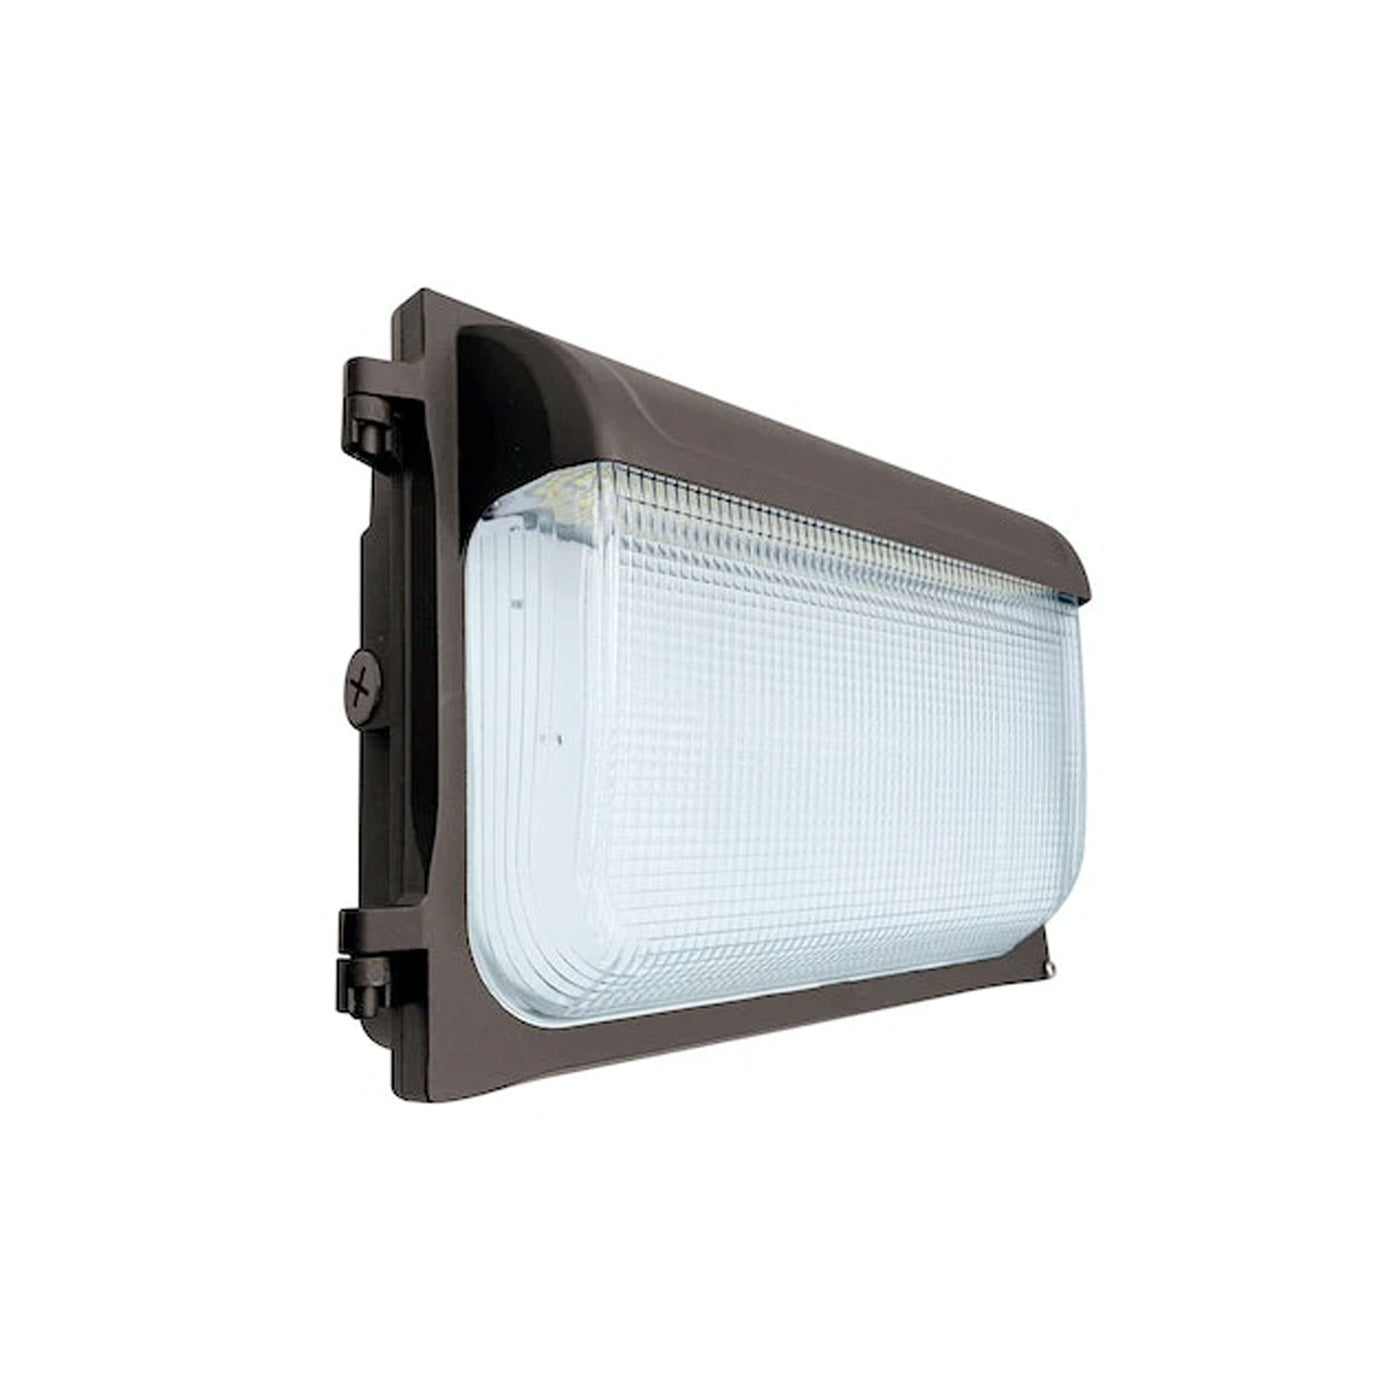 SL-Line LED Wall Pack with Photocell, 15,600 Lumens, 80W/100W/120W Selectable, 120-277V, CCT Selectable 3000K/4000K/5000K, Bronze Finish